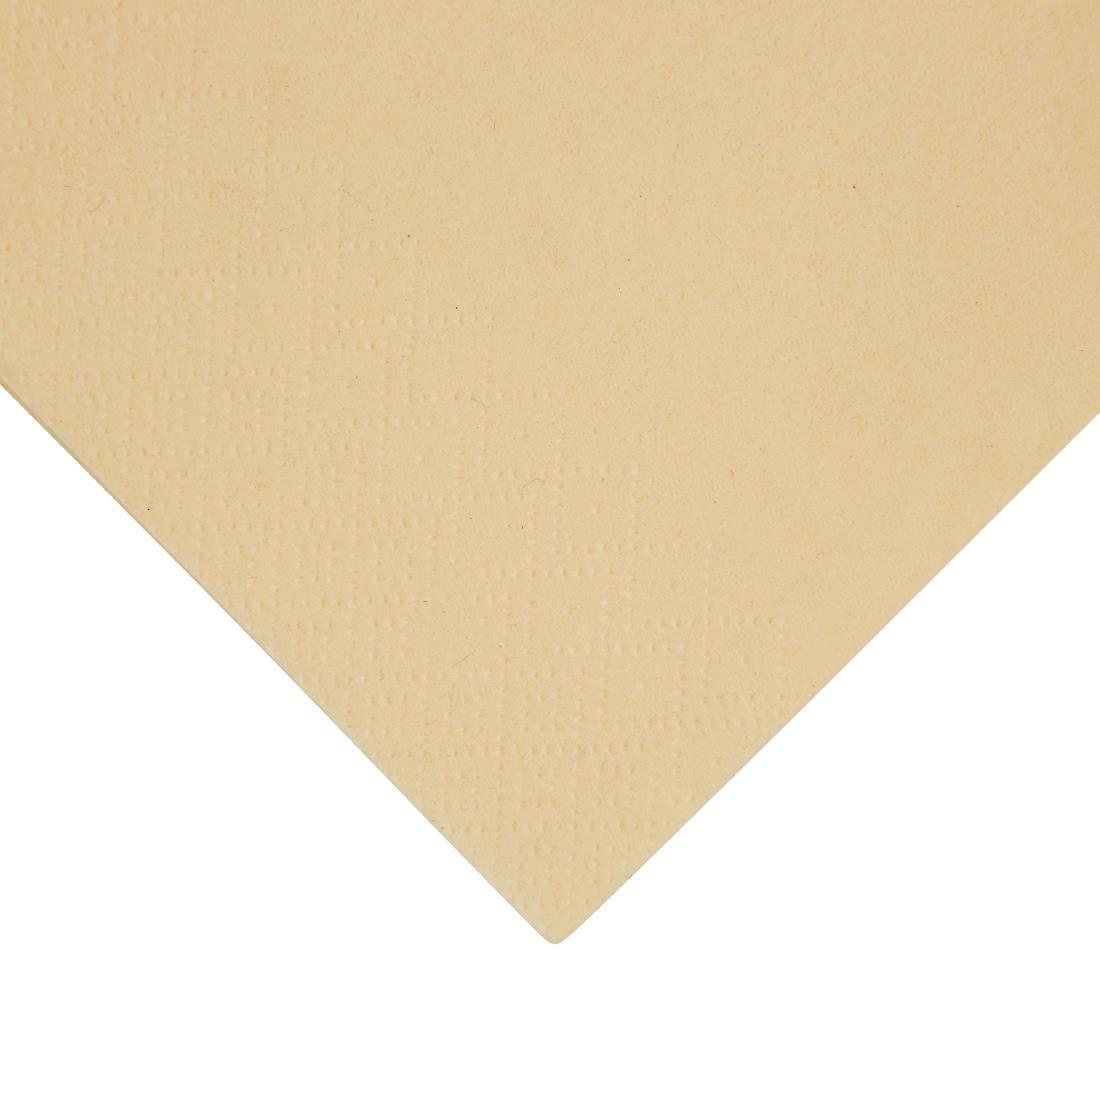 Fiesta Recyclable Dinner Napkin Cream 40x40cm 3ply 1/8 Fold (Pack of 1000) - FE259  - 2